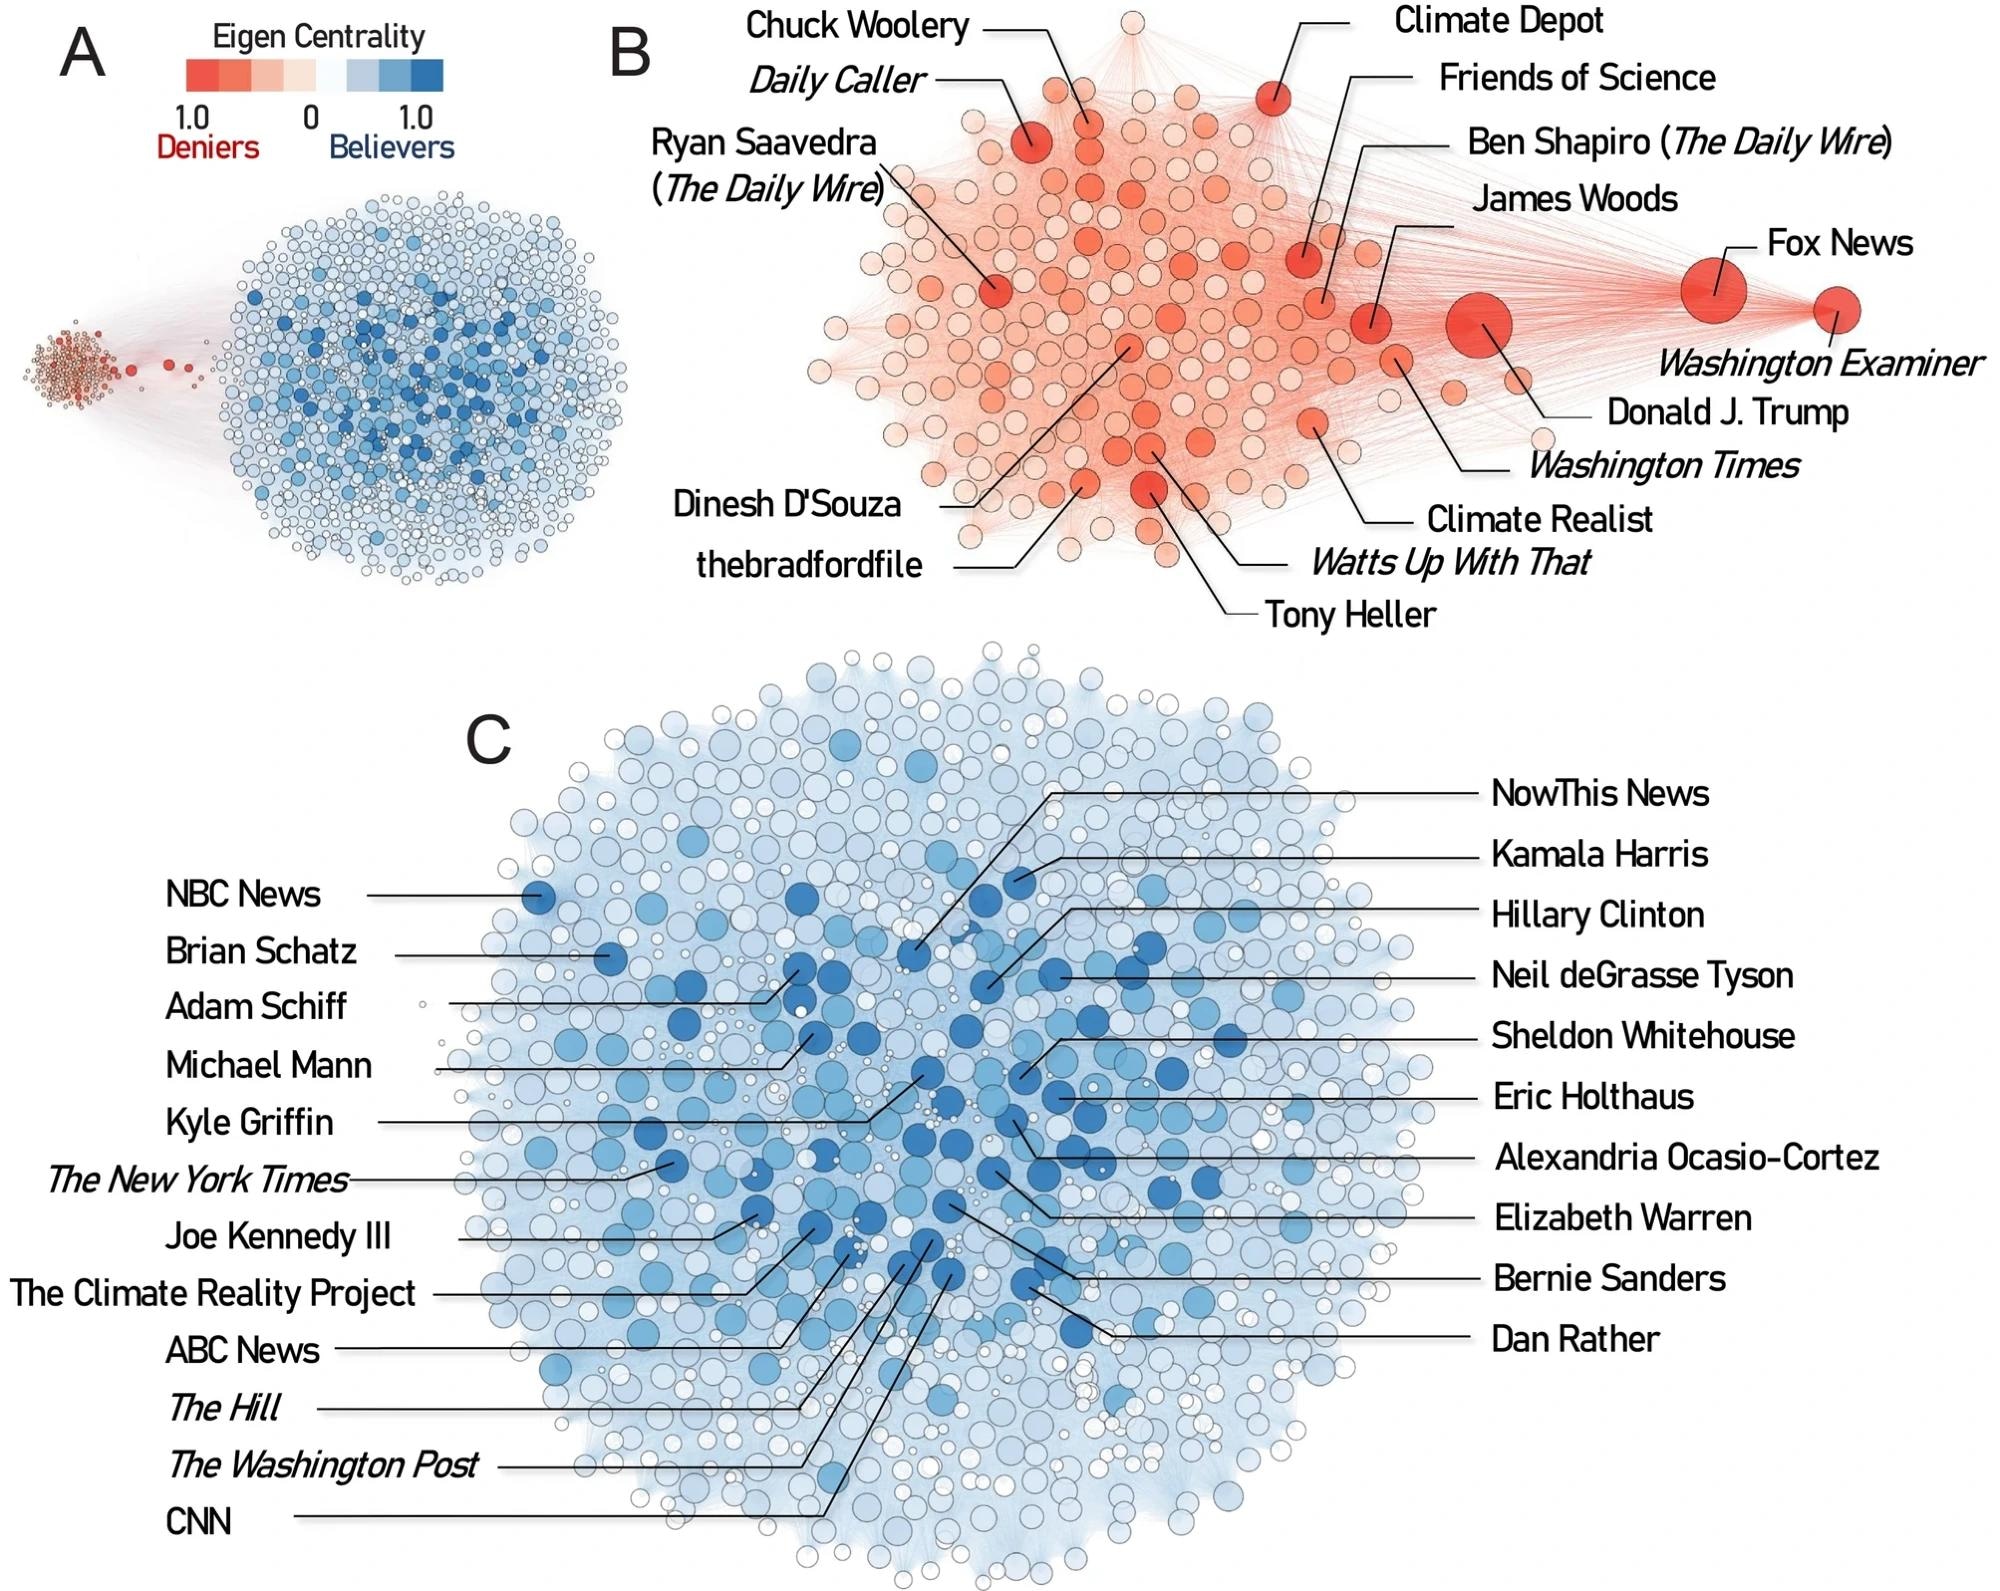 ​​​​​​​Influencers detected in climate change co-retweeted networks. (A) Co-retweeted networks formed by the 1200 most retweeted users in the U.S. The nodes represent unique accounts; the edges represent co-retweeted relationships. The size of nodes and the shade of the node color are proportional to their influence, as measured by eigenvector centrality scores. The high density of edges within the communities makes many individual edges not displayable. The top influencers in the community of climate change deniers (B) and believers (C) are labeled with the usernames. In panels (B) and (C), edges-to-users in the other community are not displayed.